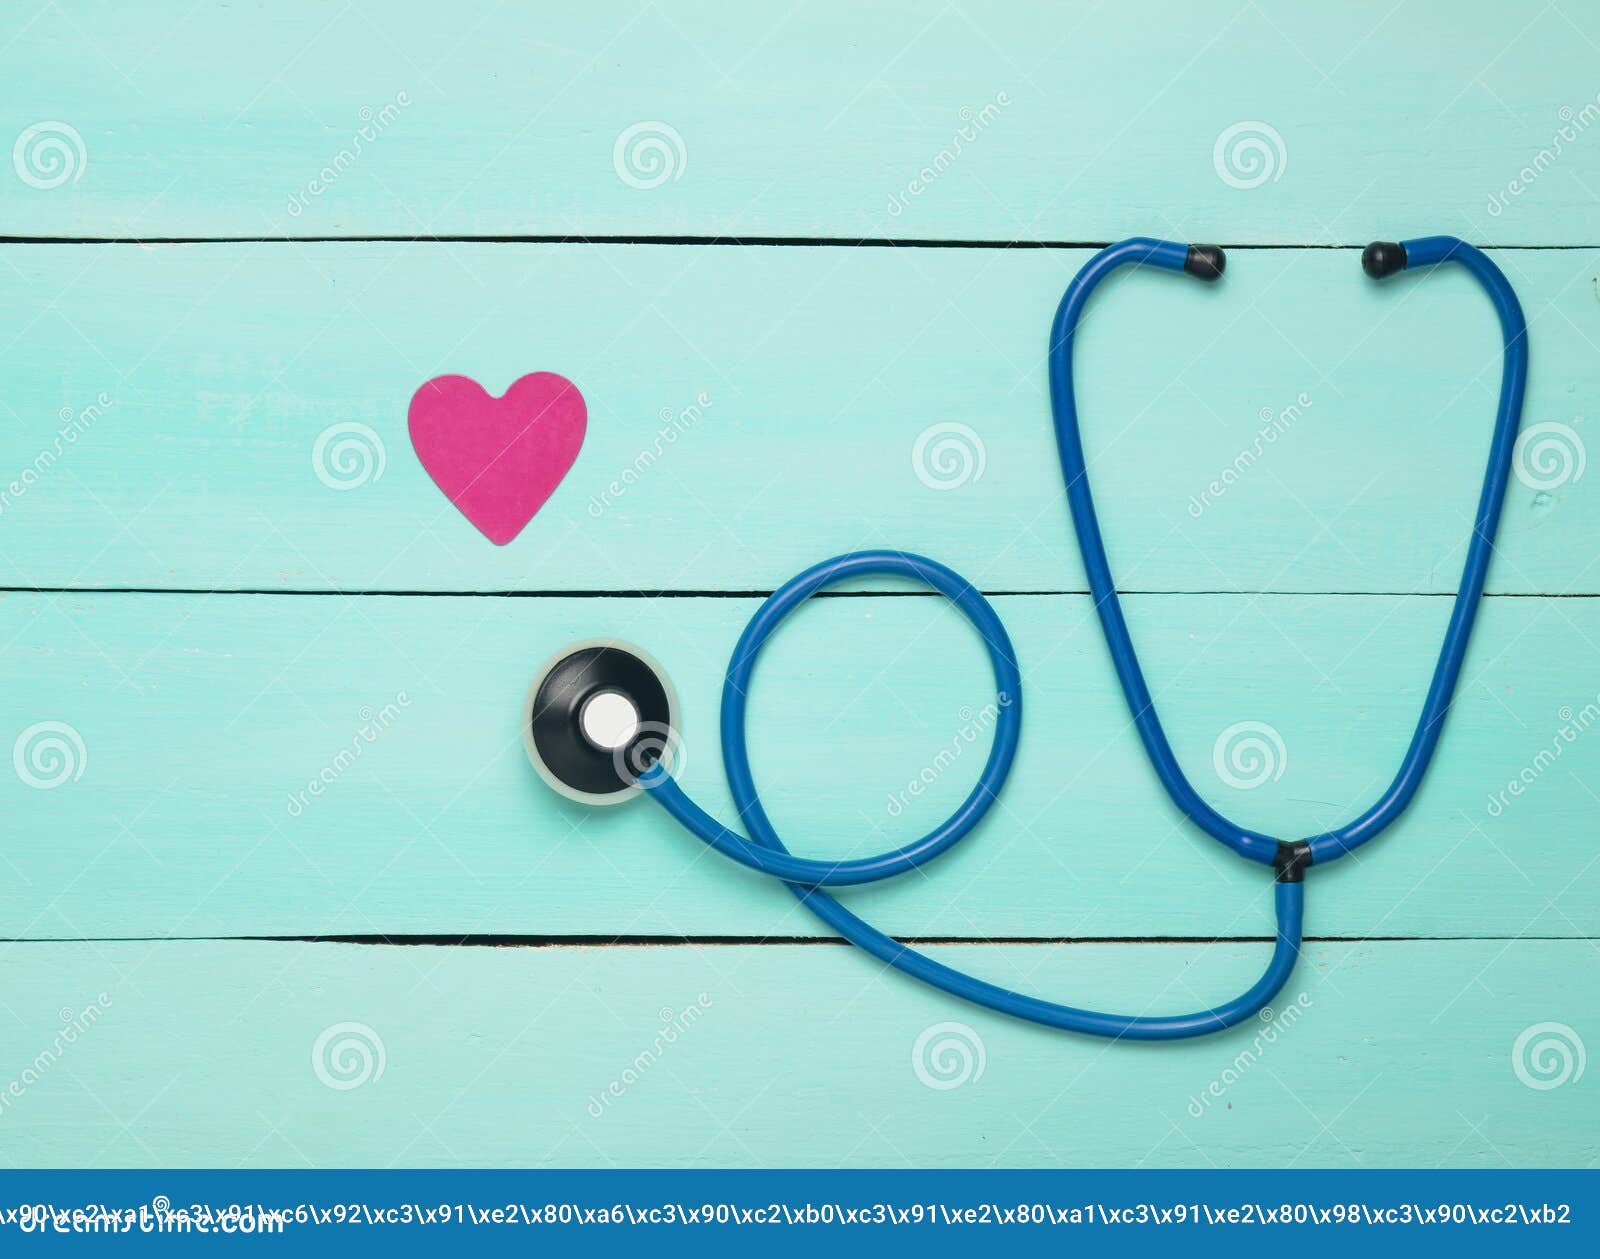 stethoscope and heart on a blue wooden table. cardiology equipment for diagnosing cardiovascular diseases. top view. flat lay.